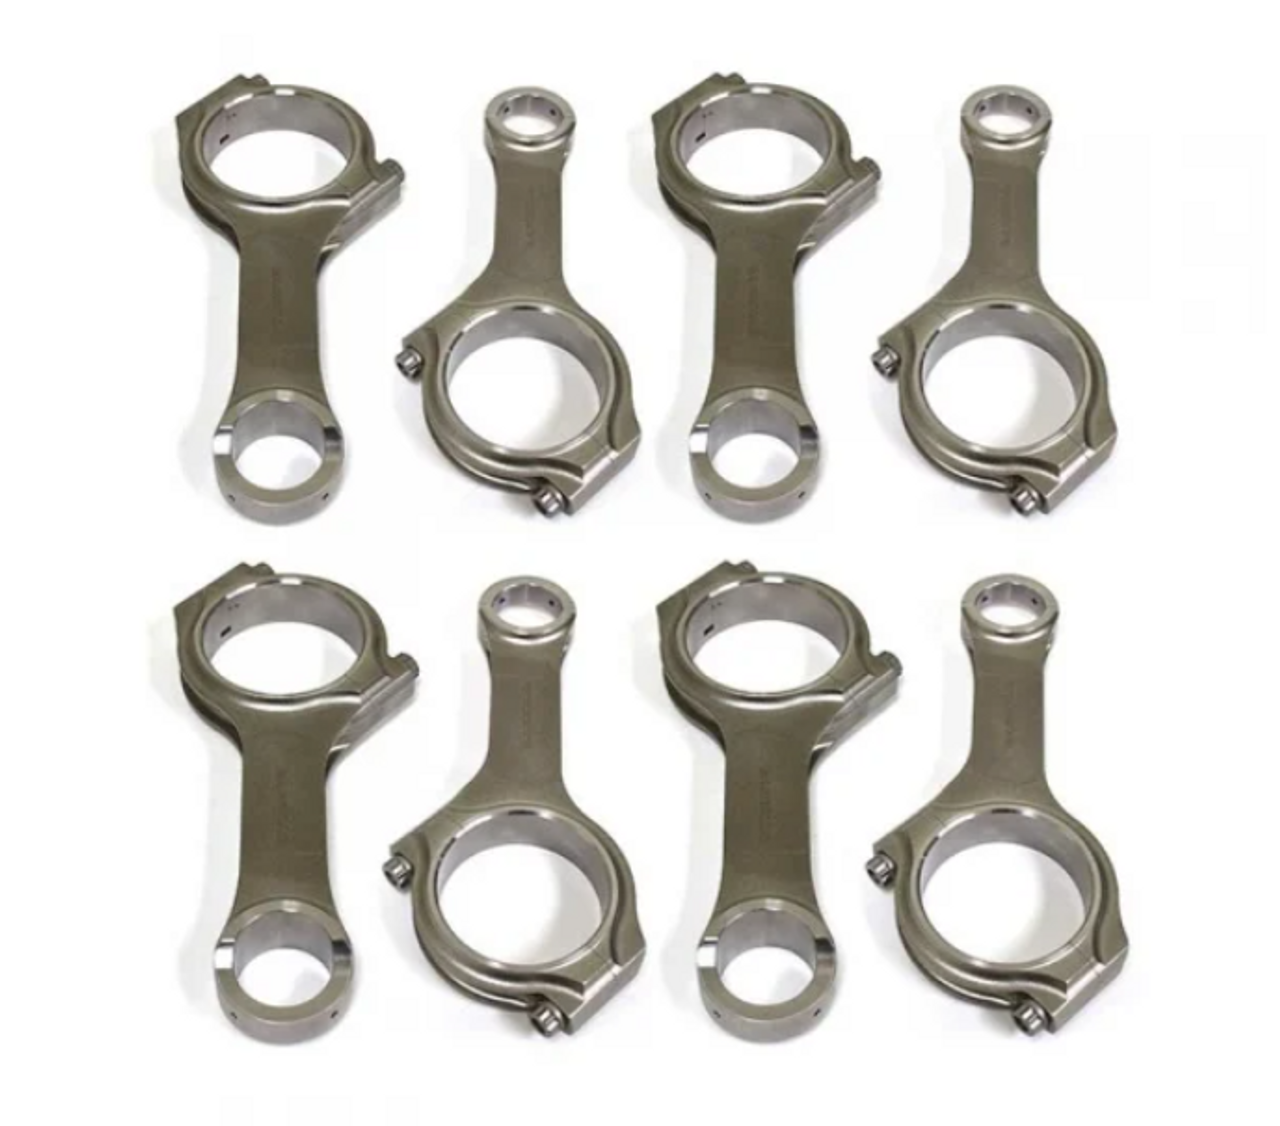 CARRILLO 6.4L POWERSTROKE PRO-H CONNECTING ROD SET H-11 BOLTS 2008-2010 FORD 6.4L POWERSTROKE